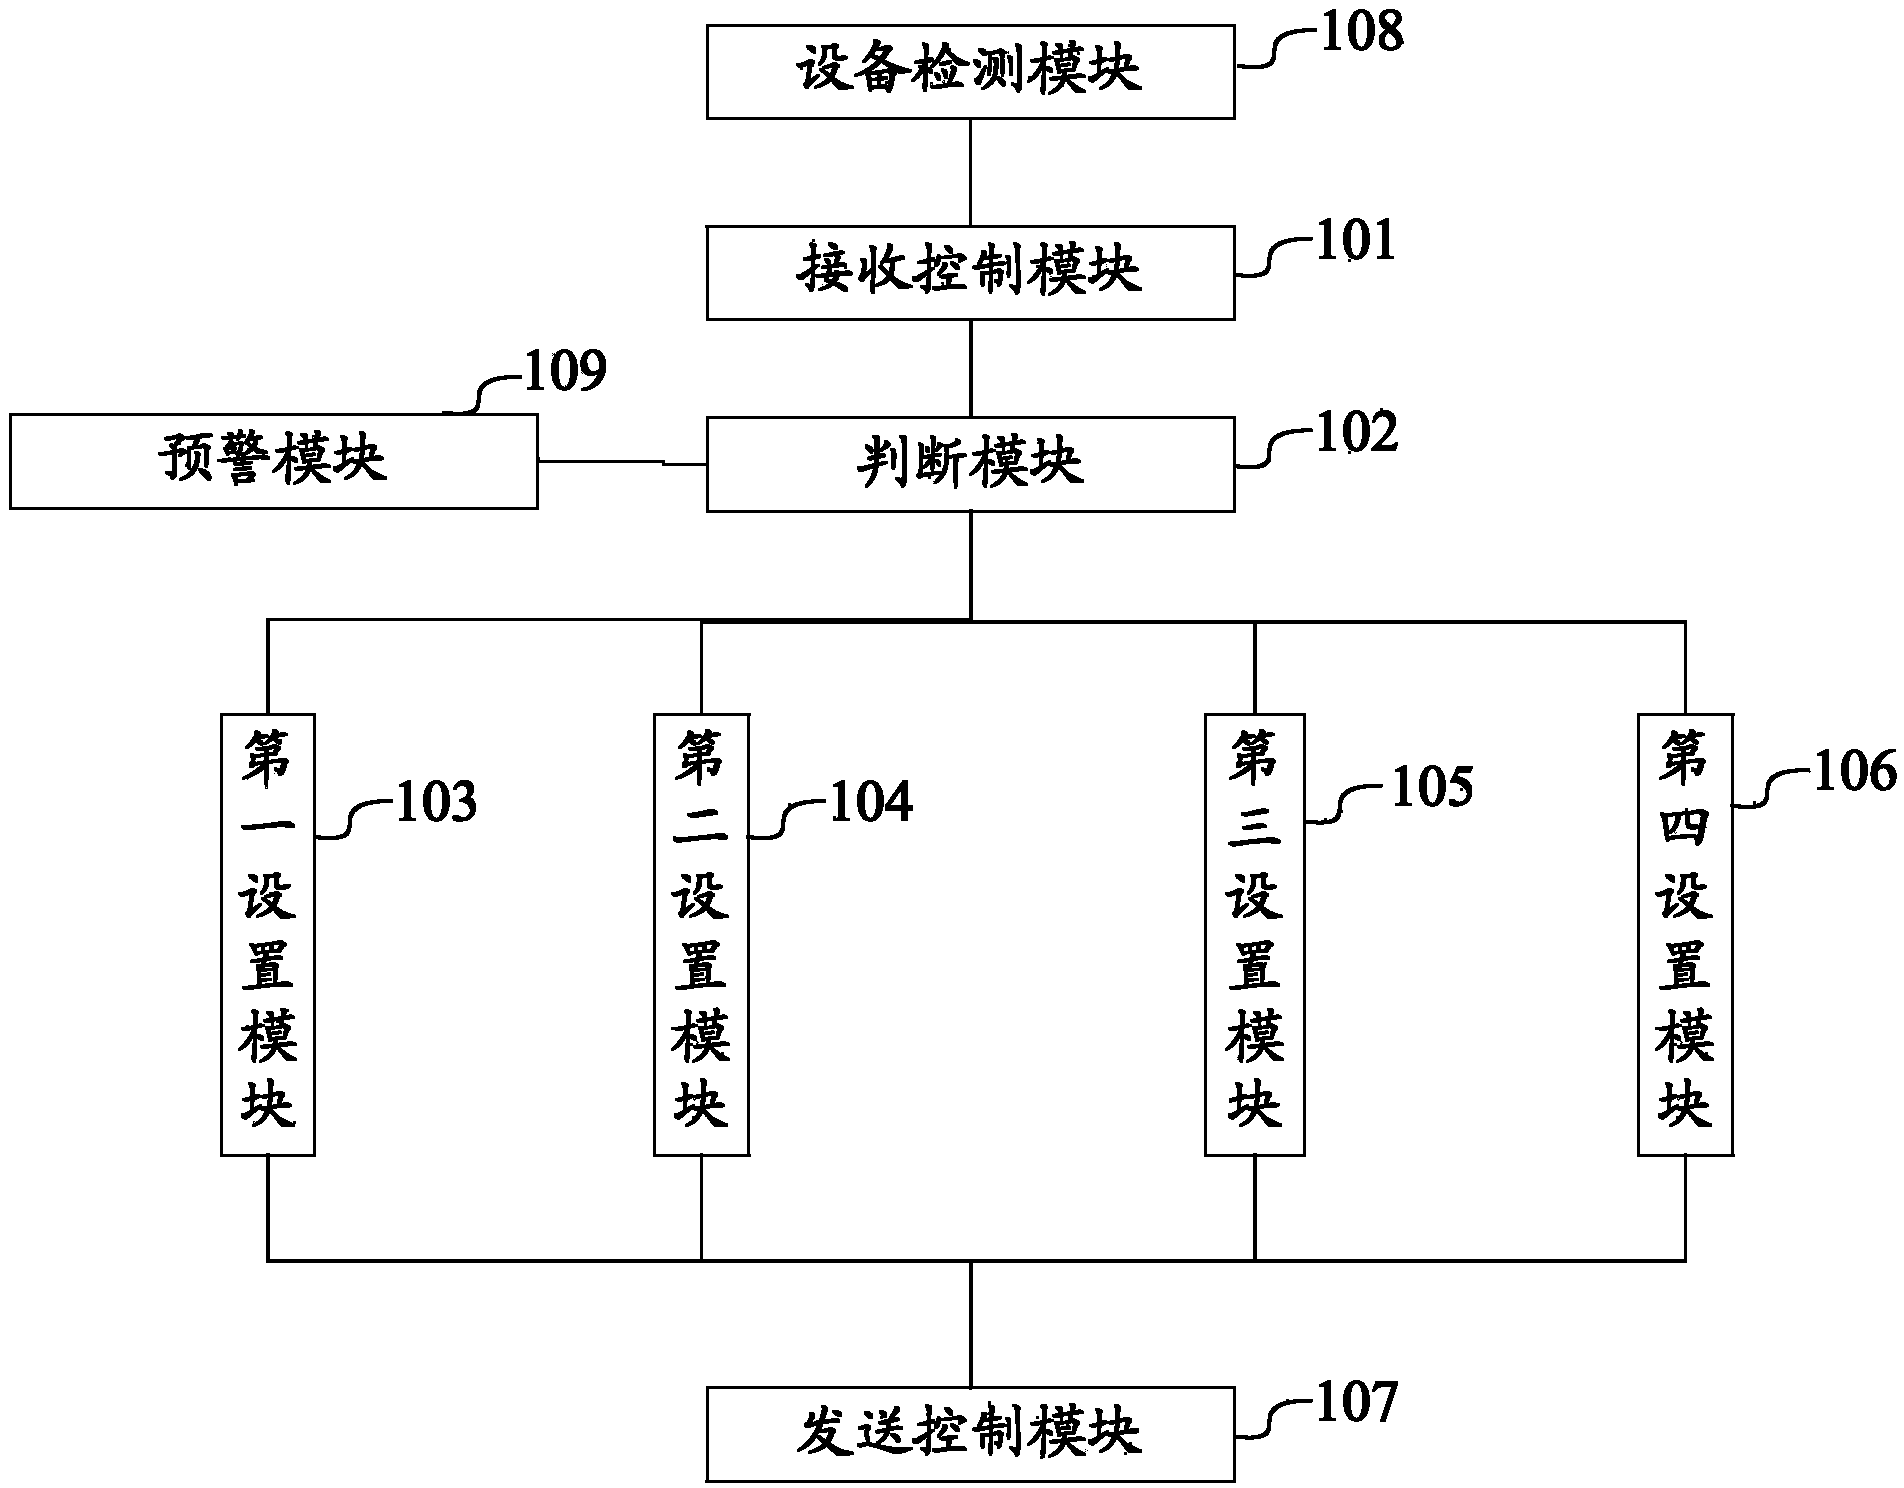 Real-time Ethernet based redundancy control device, as well as device redundancy system and method